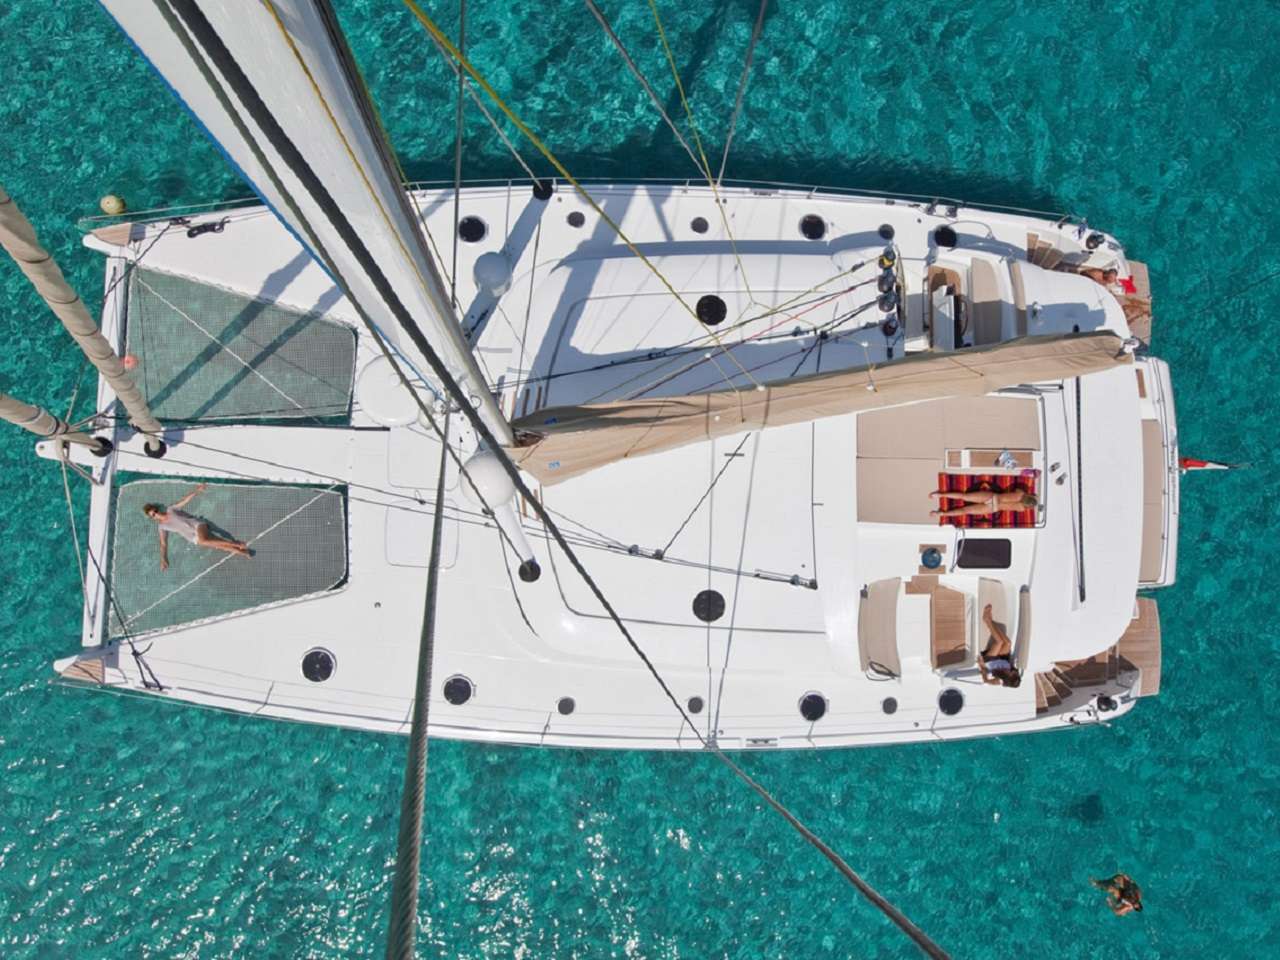 Catamaran Yacht 'MOBY DICK' Aerian view, 10 PAX, 3 Crew, 65.00 Ft, 19.00 Meters, Built 2009, Fountaine Pajot, Refit Year 2021